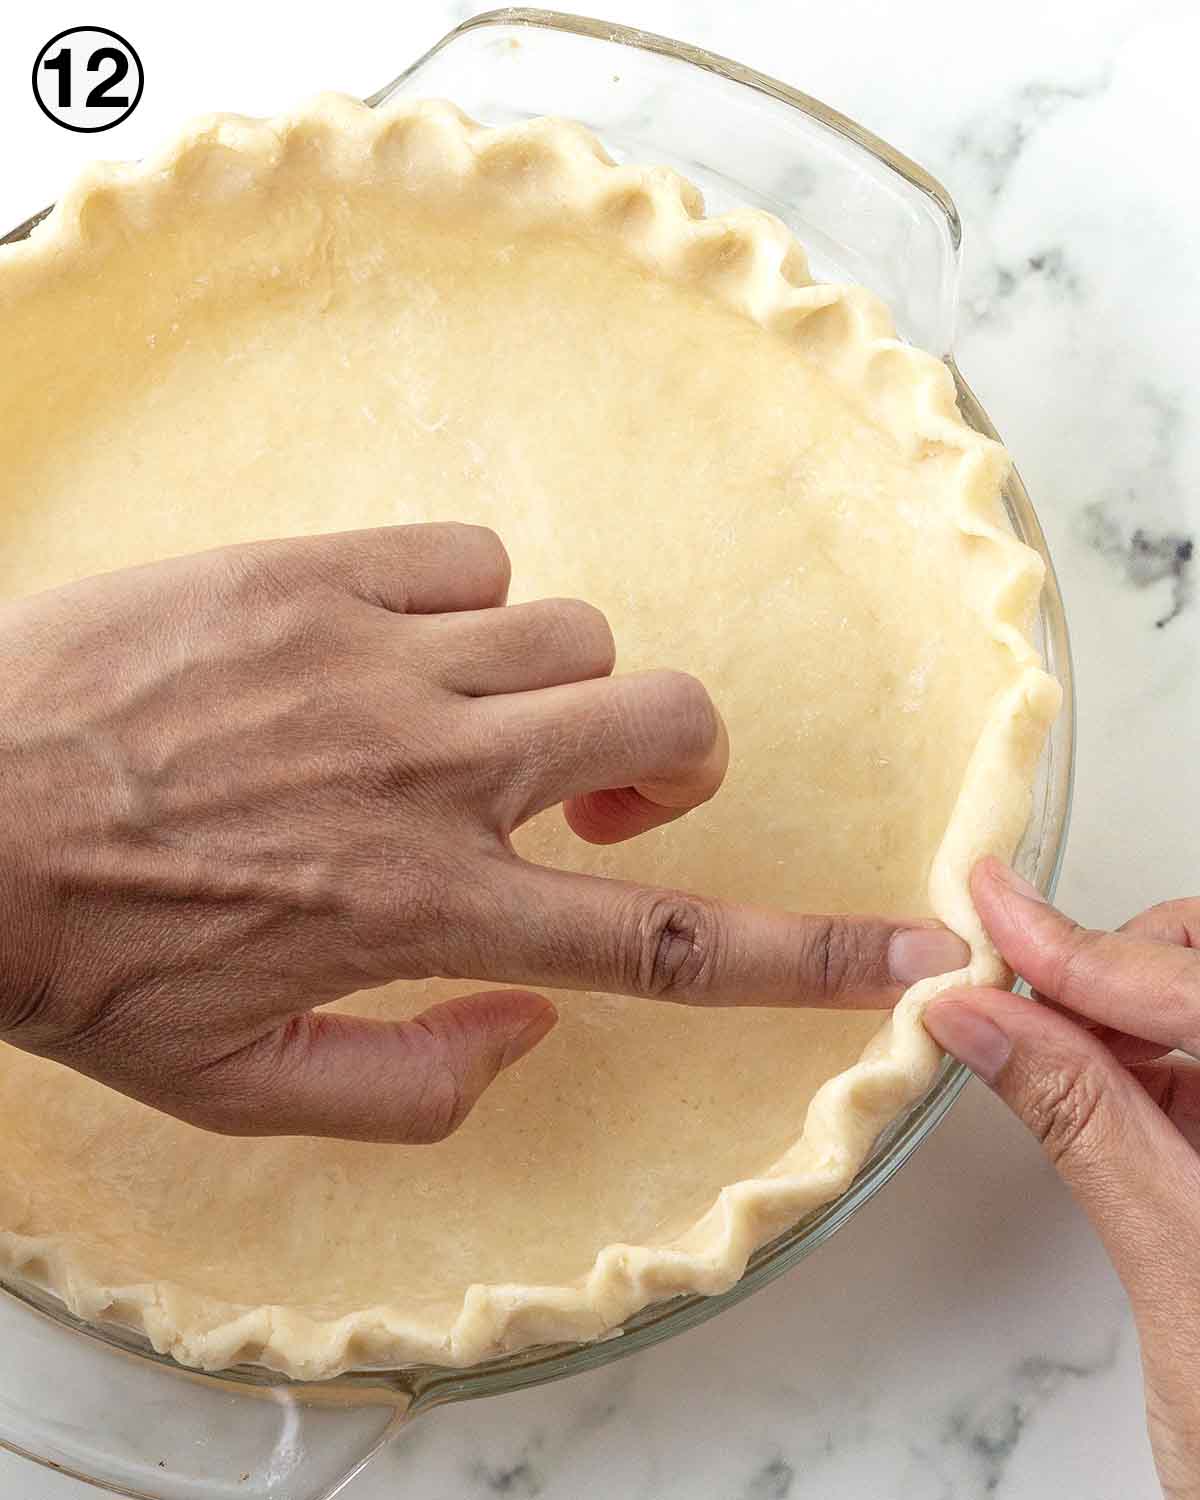 Hands crimping the edges of a pie crust.